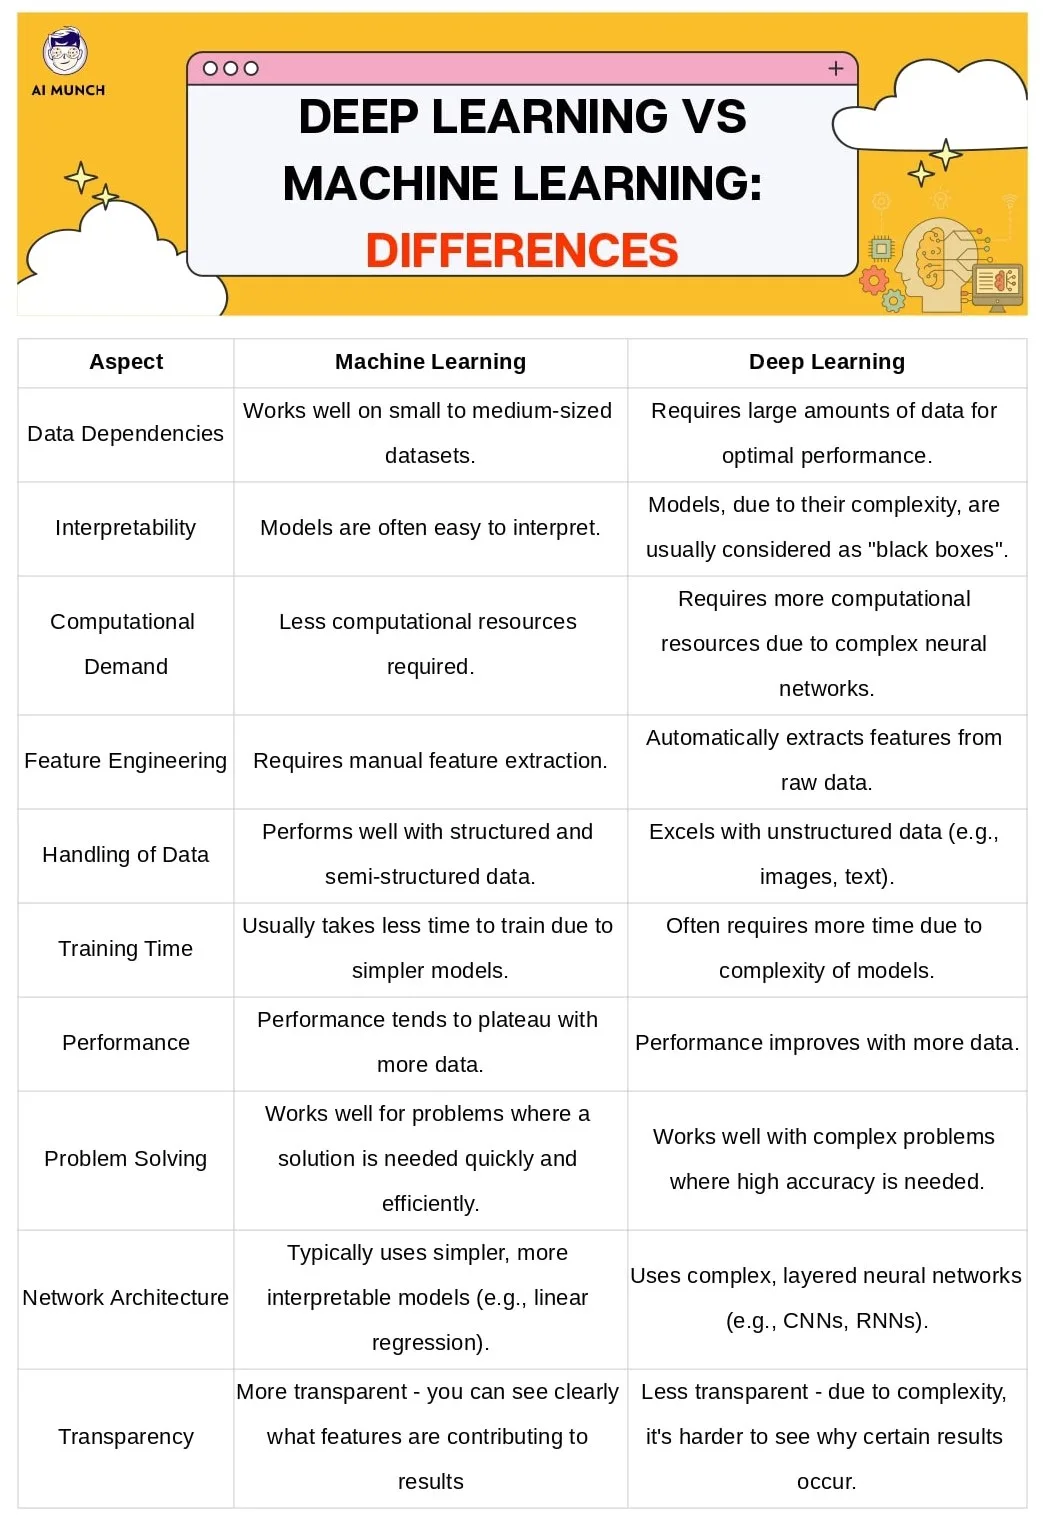 Deep Learning vs Machine Learning: The Key Differences